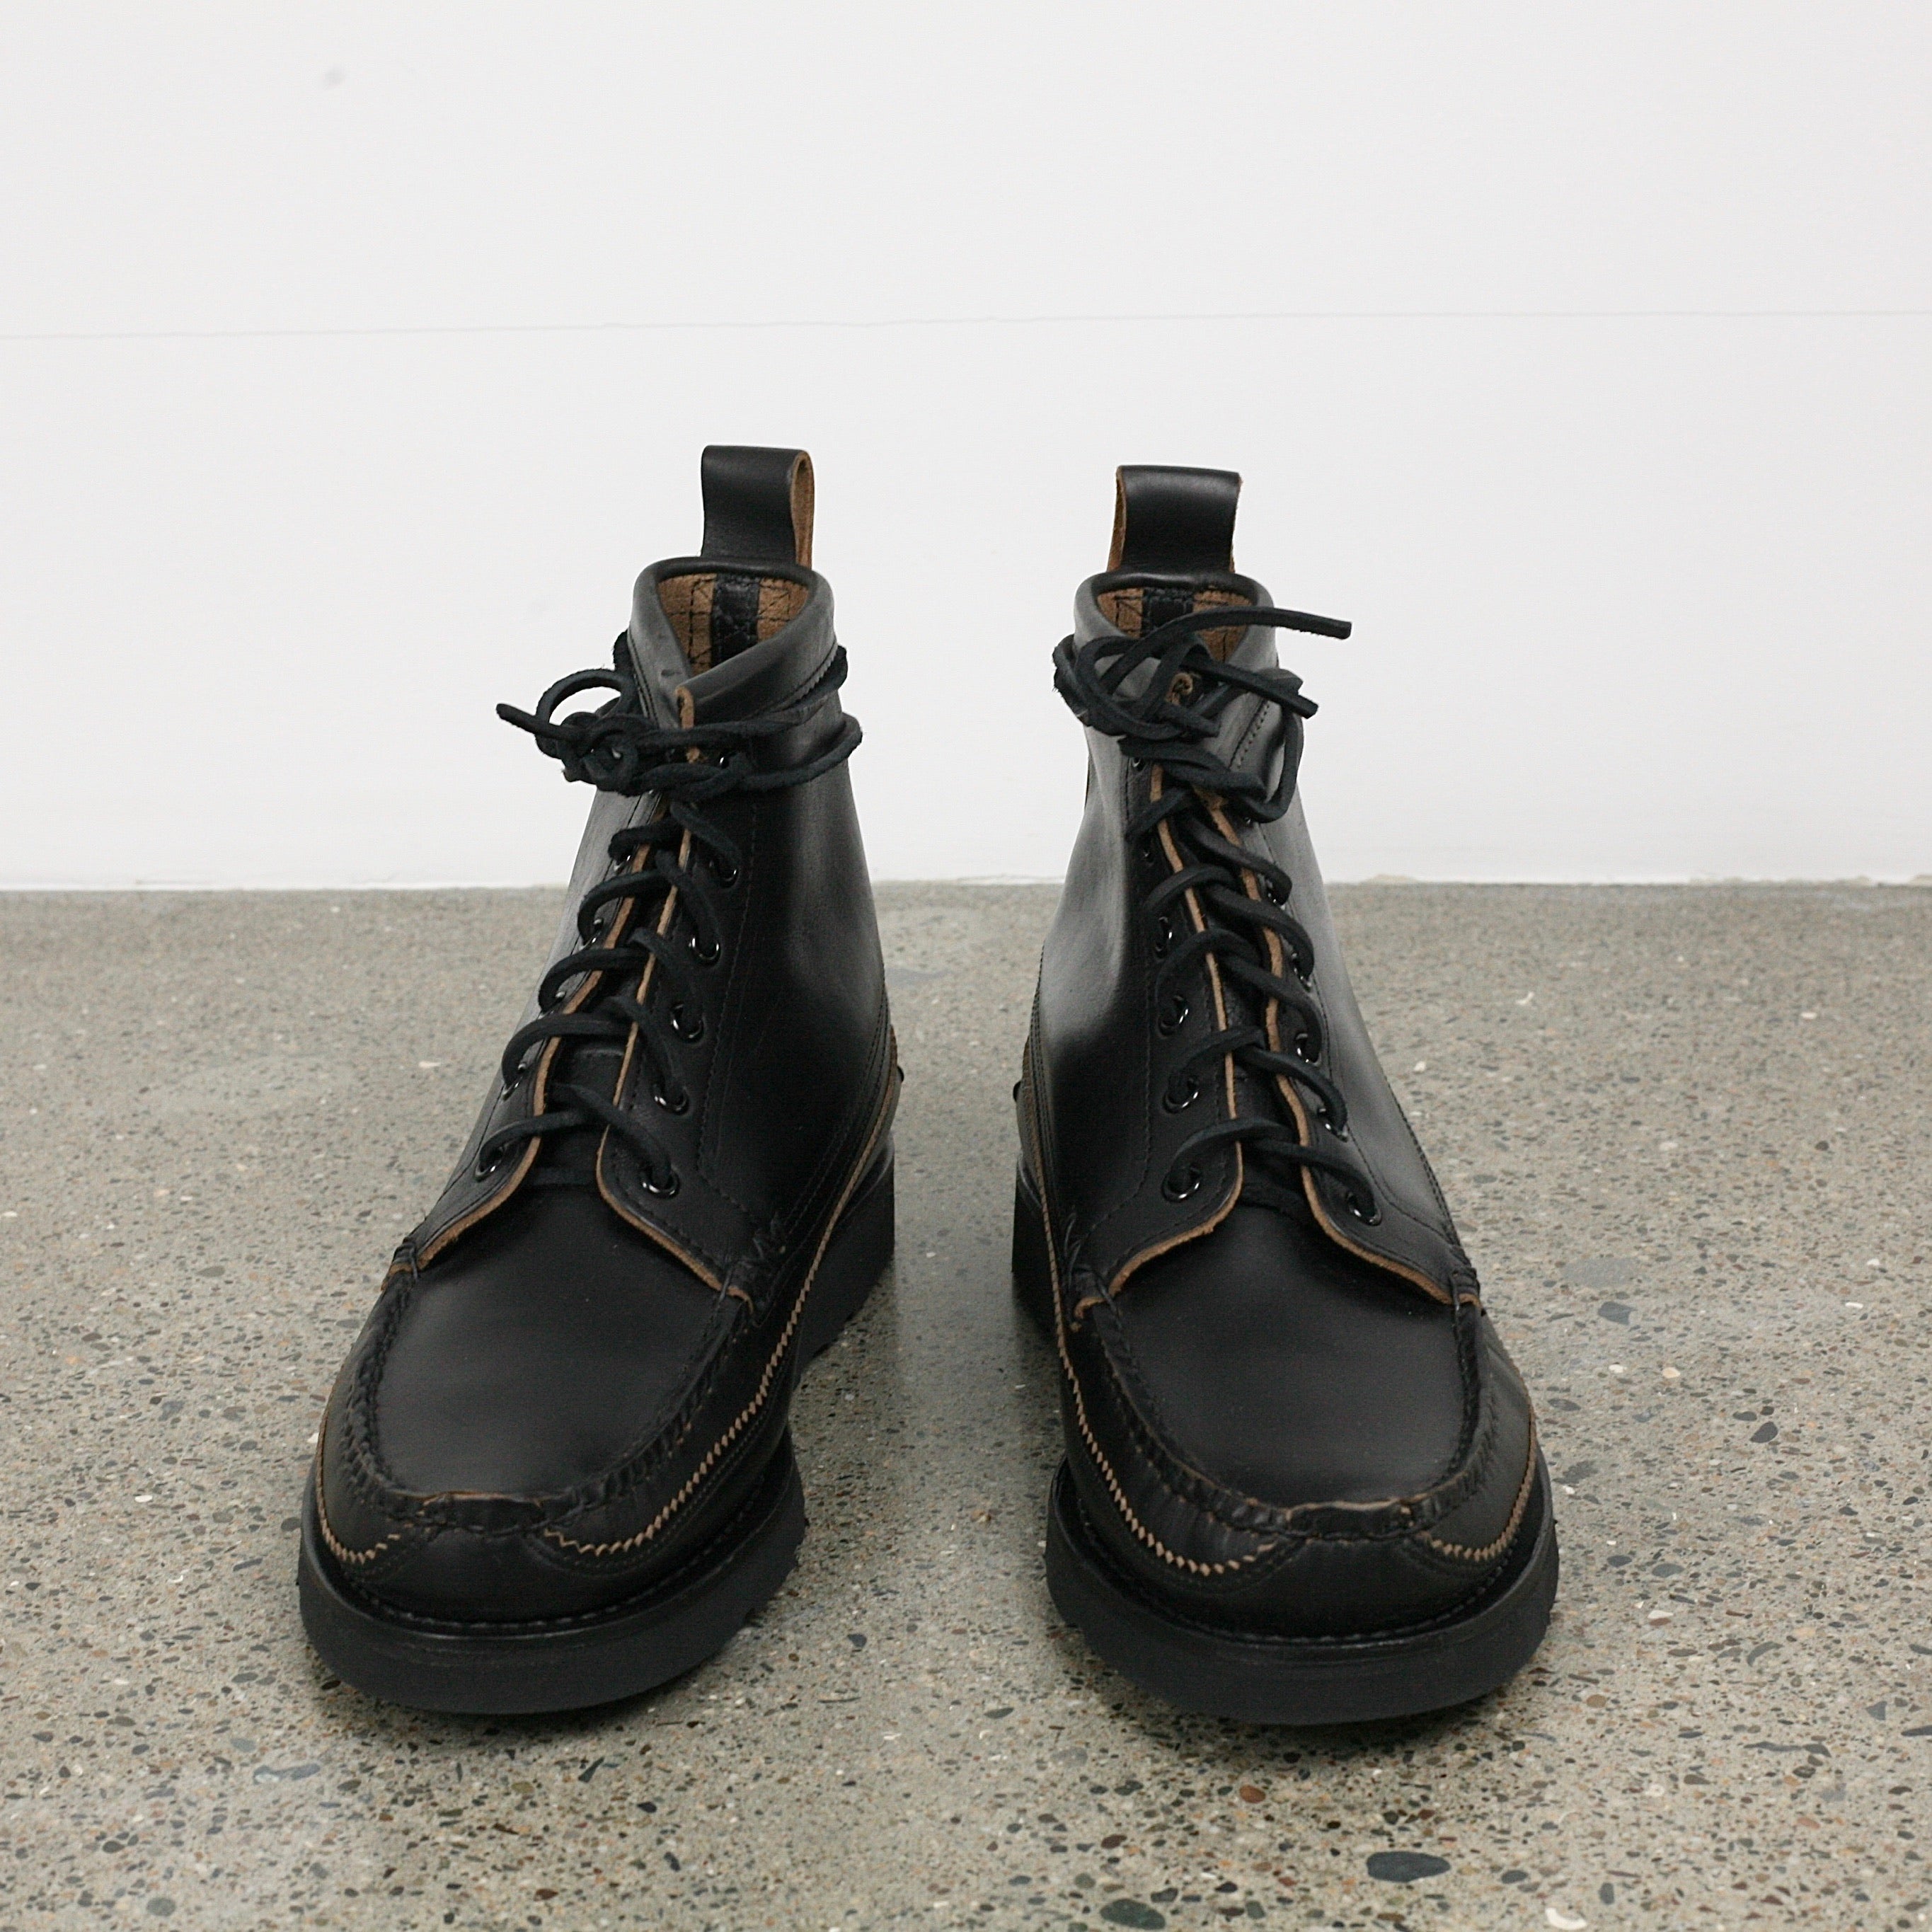 Maine Guide 6 Eye DB Boots in G Black